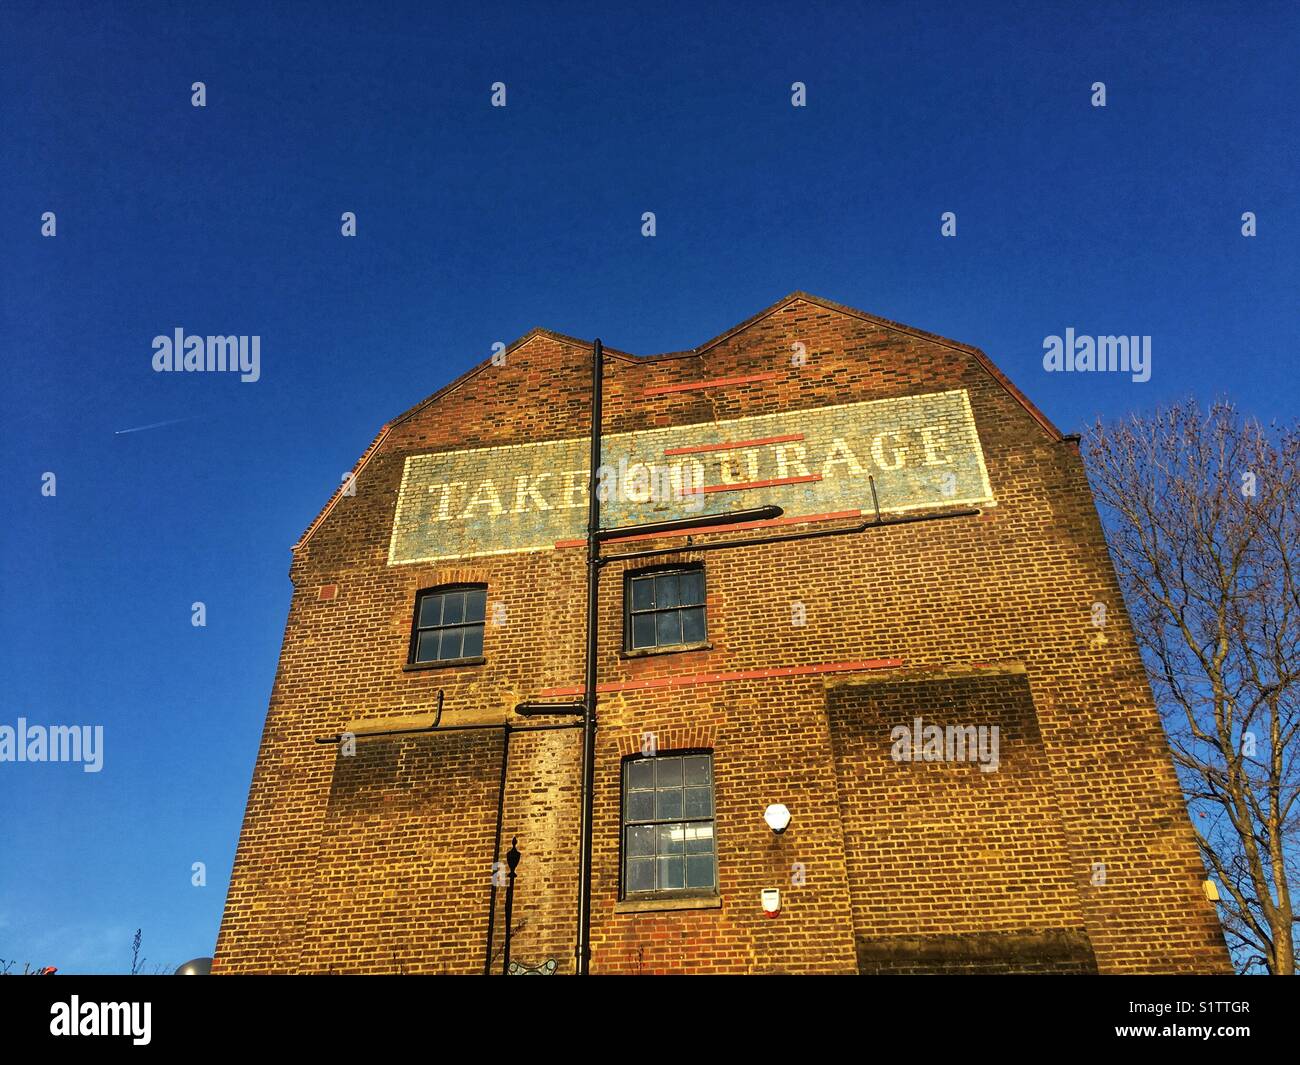 Take Courage Advert on What used to be The Courage & Co. Ltd Brewery in Southwark, London Stock Photo